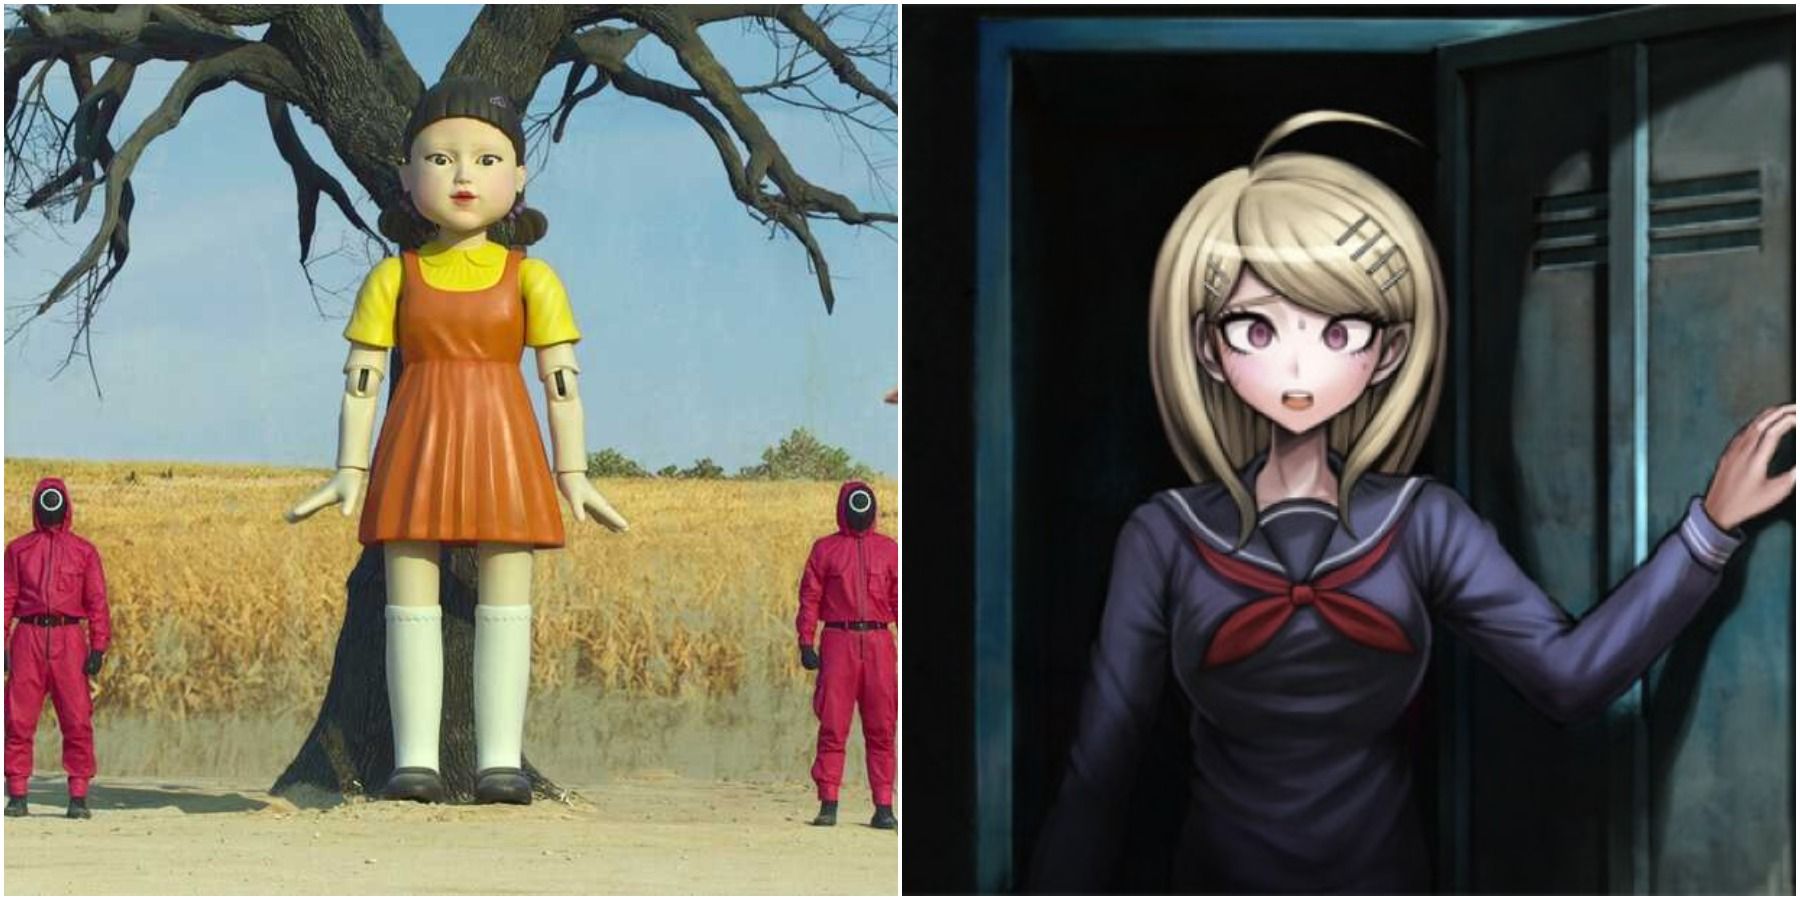 Split image of doll from Squid Game and female protagonist from Danganronpa V3.